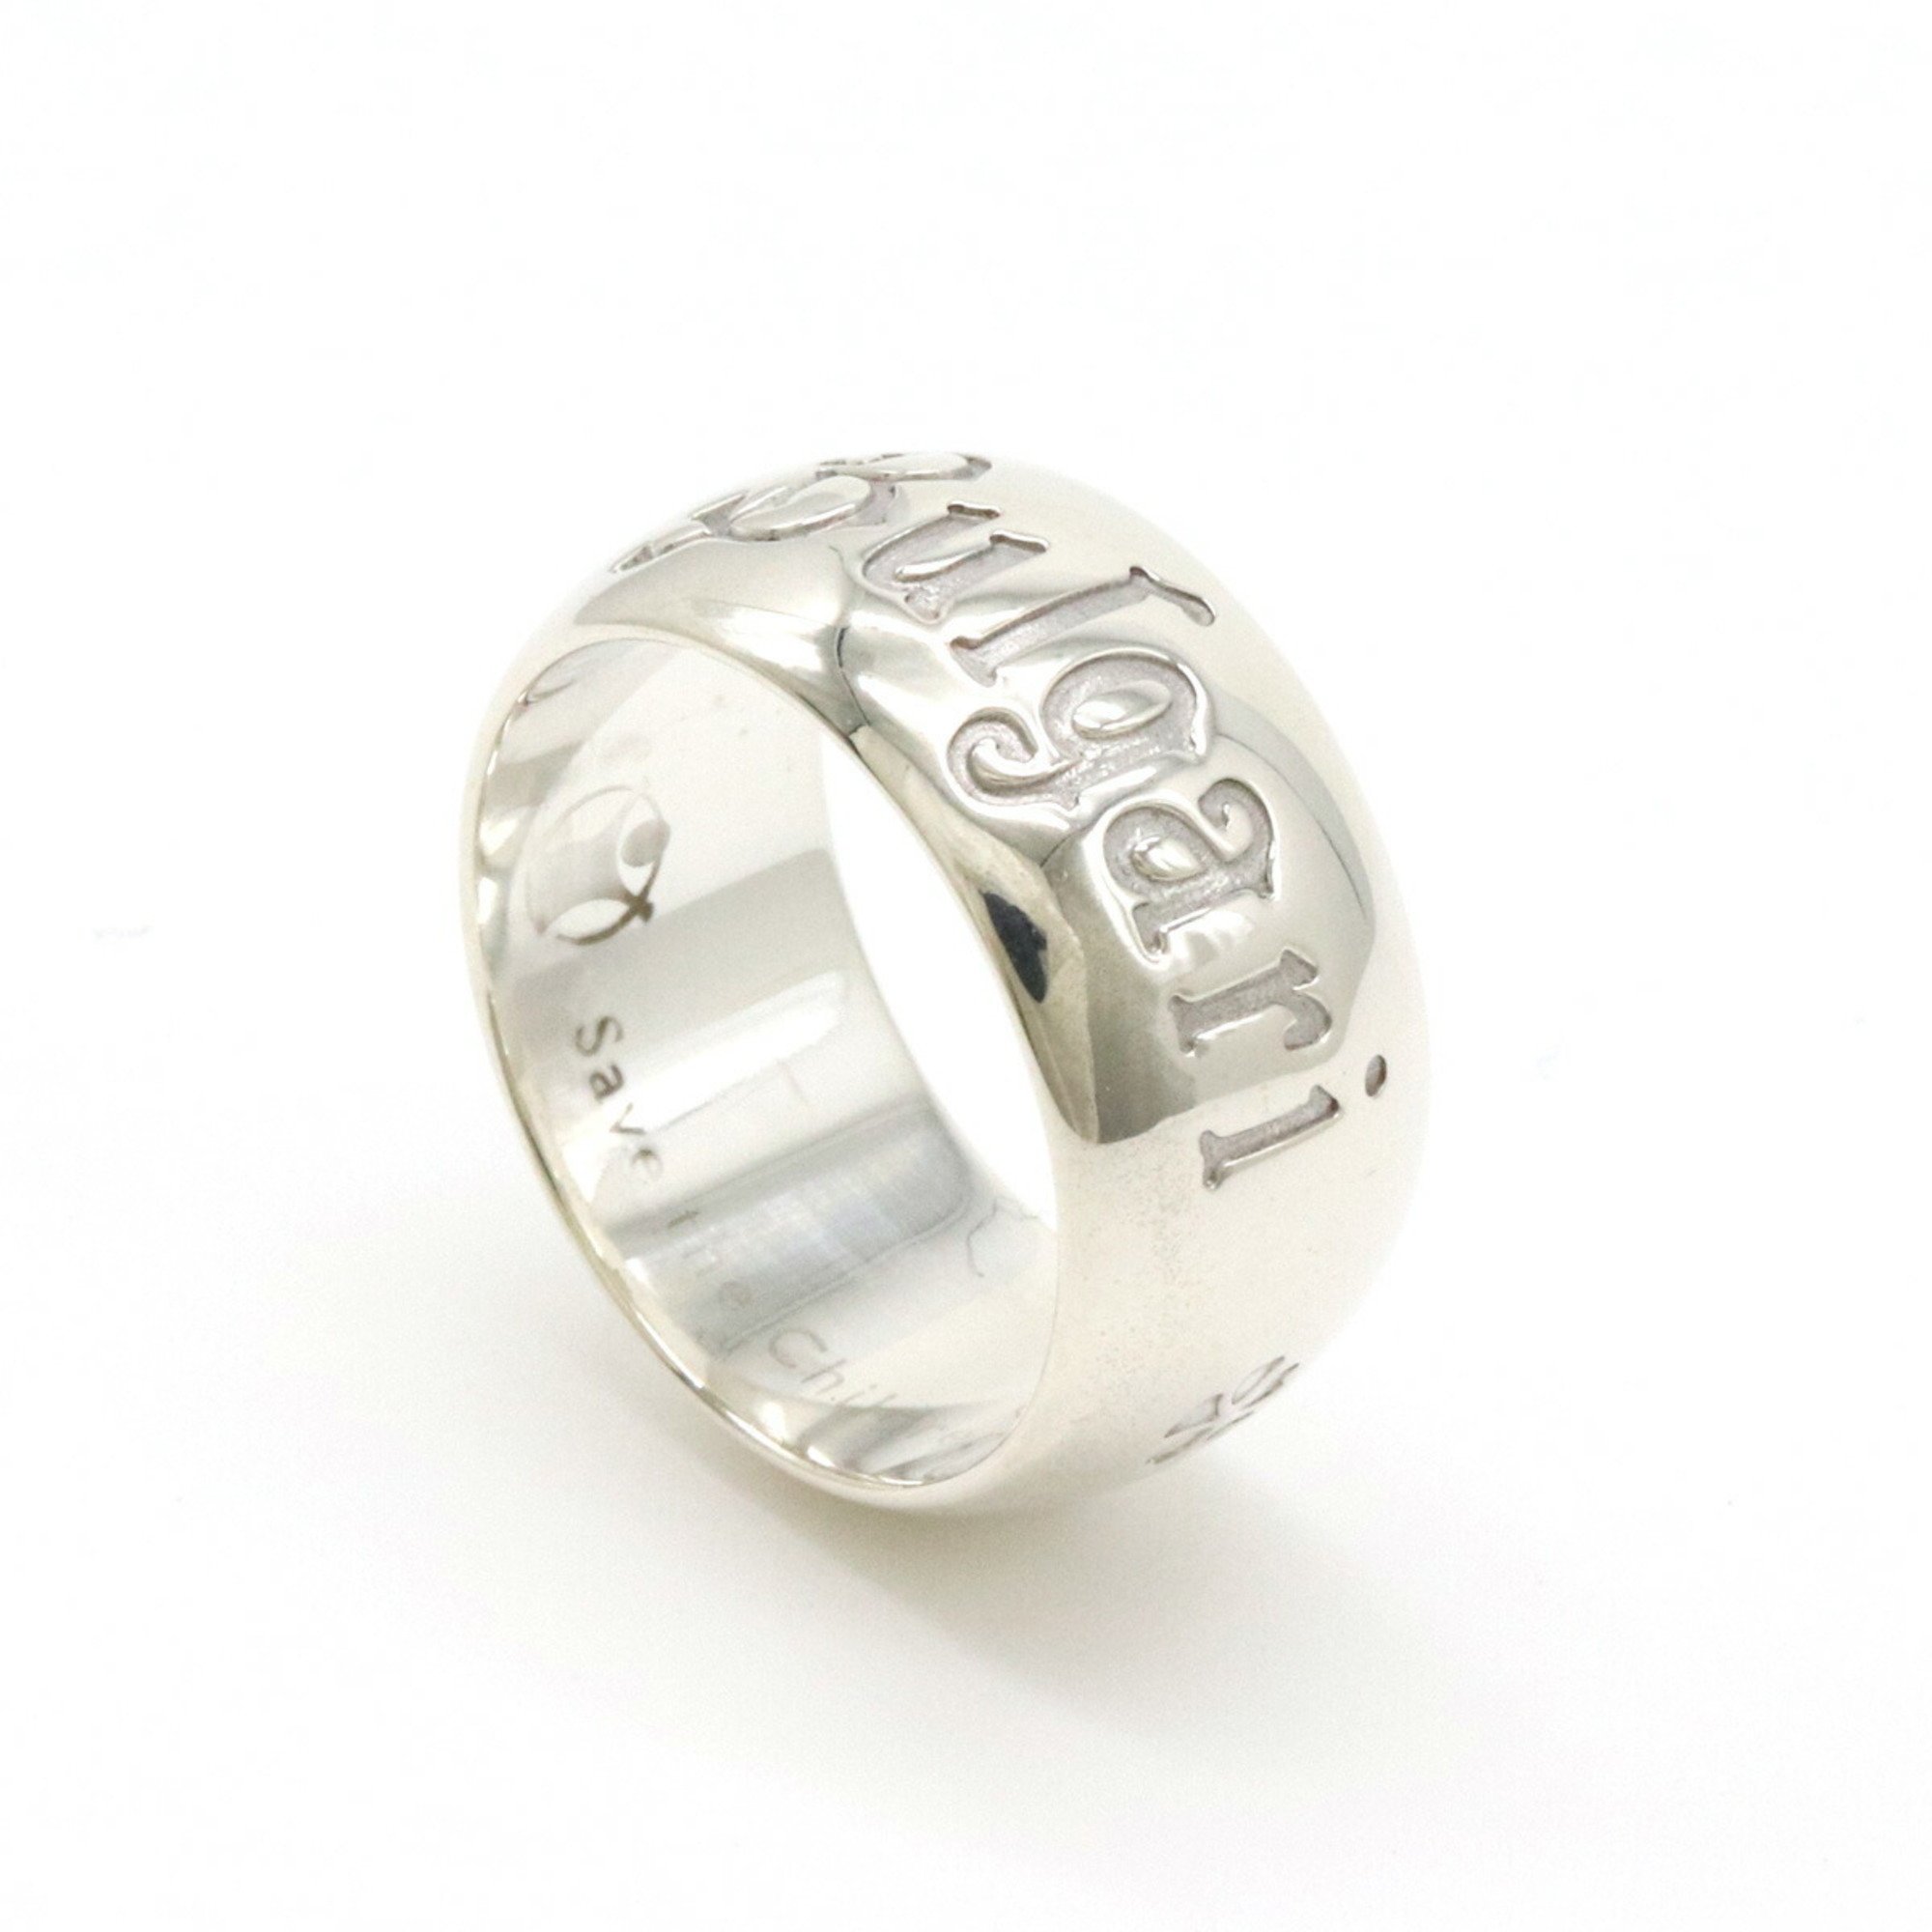 BVLGARI Save the Children Sotirio Ring Charity SV925 Silver #55 Japanese Size Approx. 16